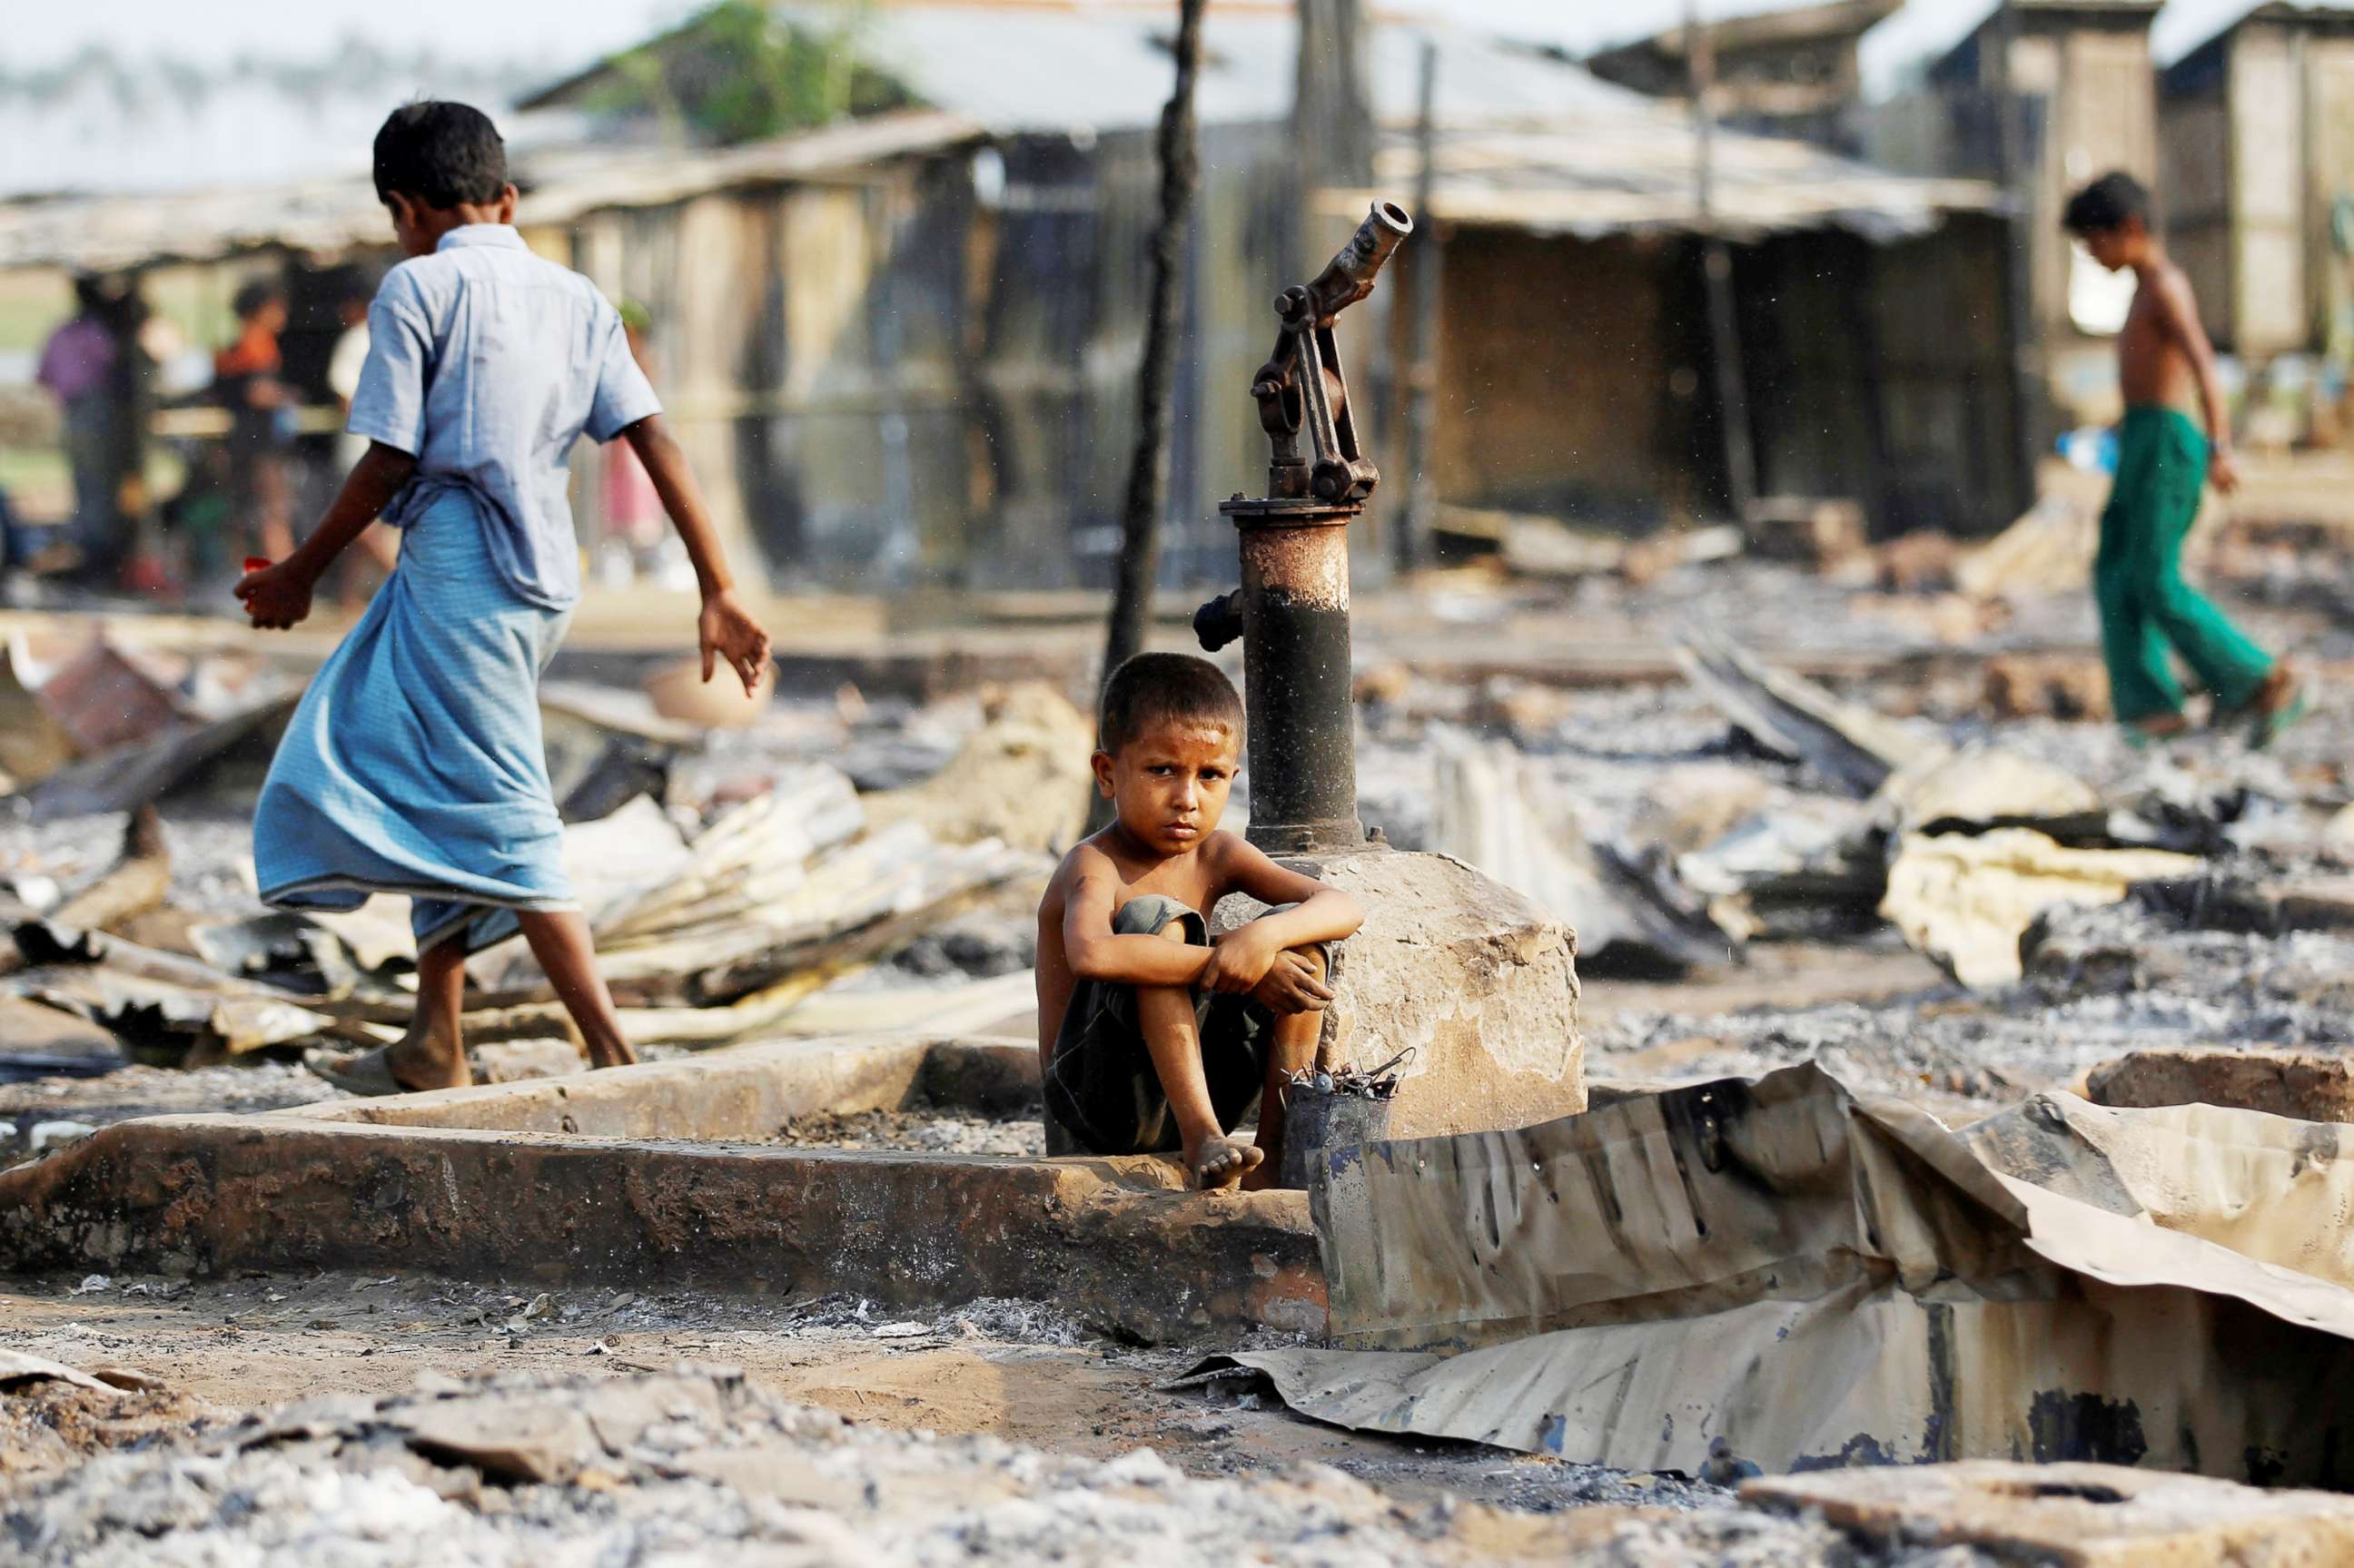 PHOTO: A boy sit in a burnt area after fire destroyed shelters at a camp for internally displaced Rohingya Muslims in the western Rakhine State near Sittwe, Myanmar, May 3, 2016.